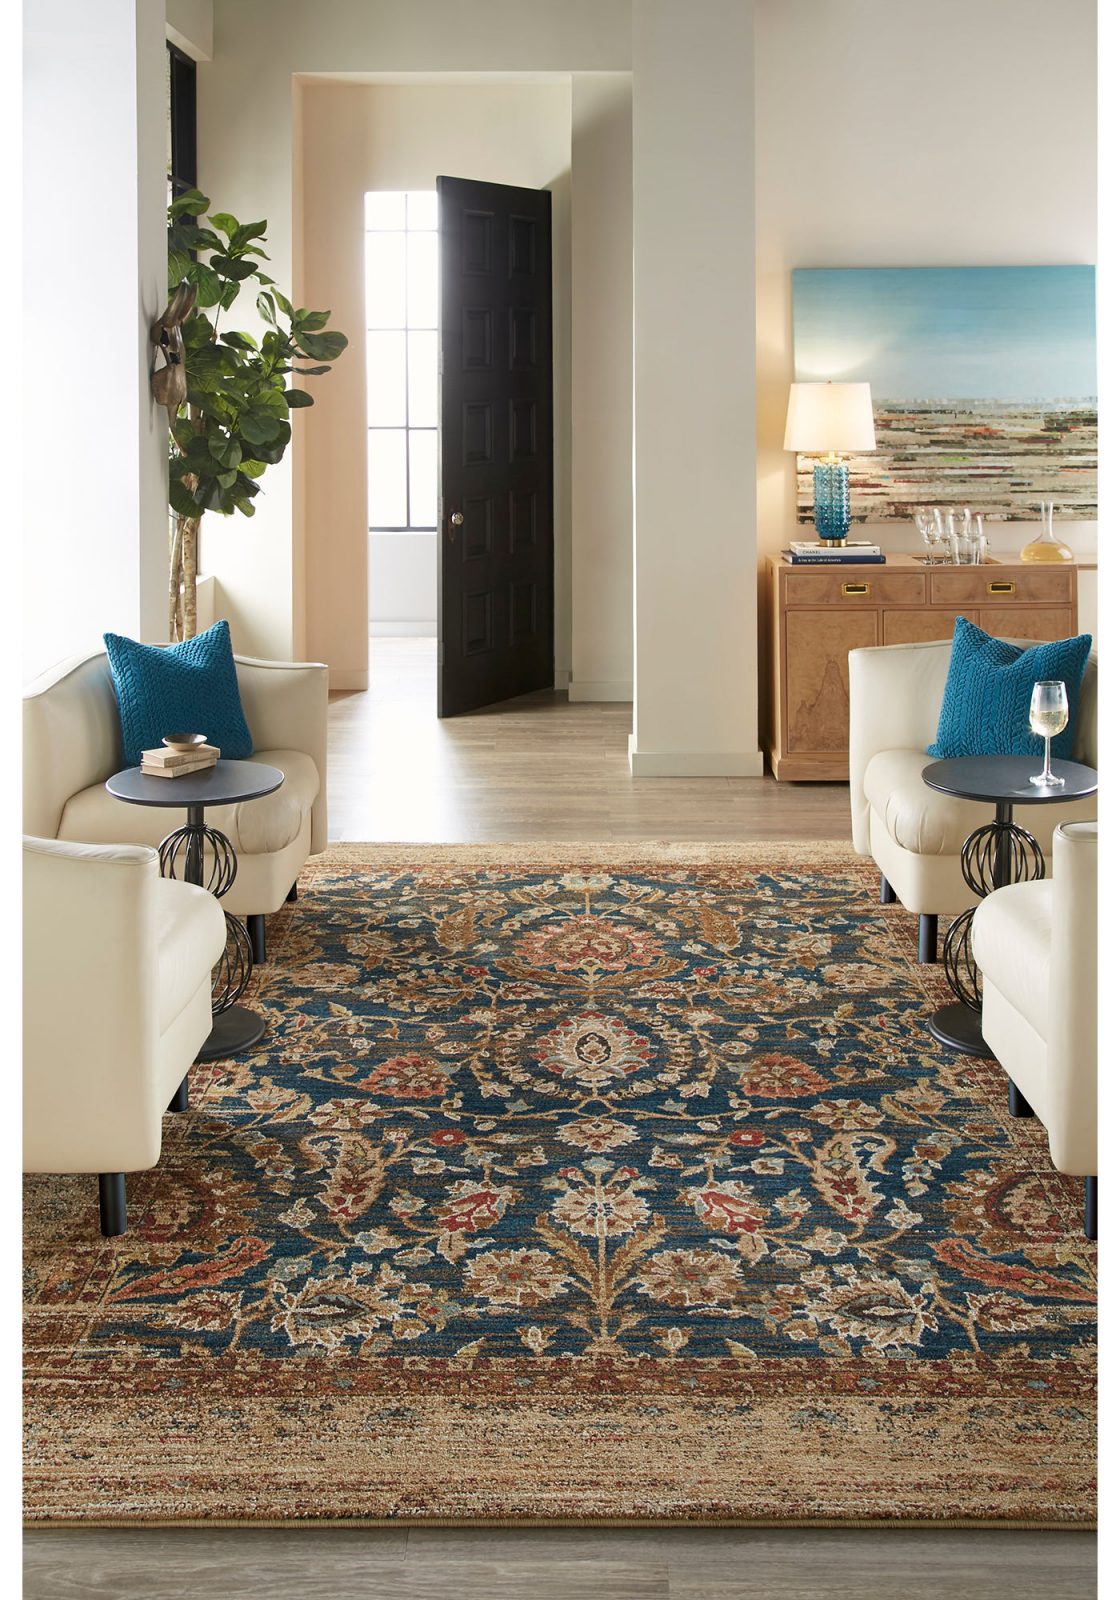 Area Rug Inspiration Gallery | Buffalo, MN | Neil's Floor Covering